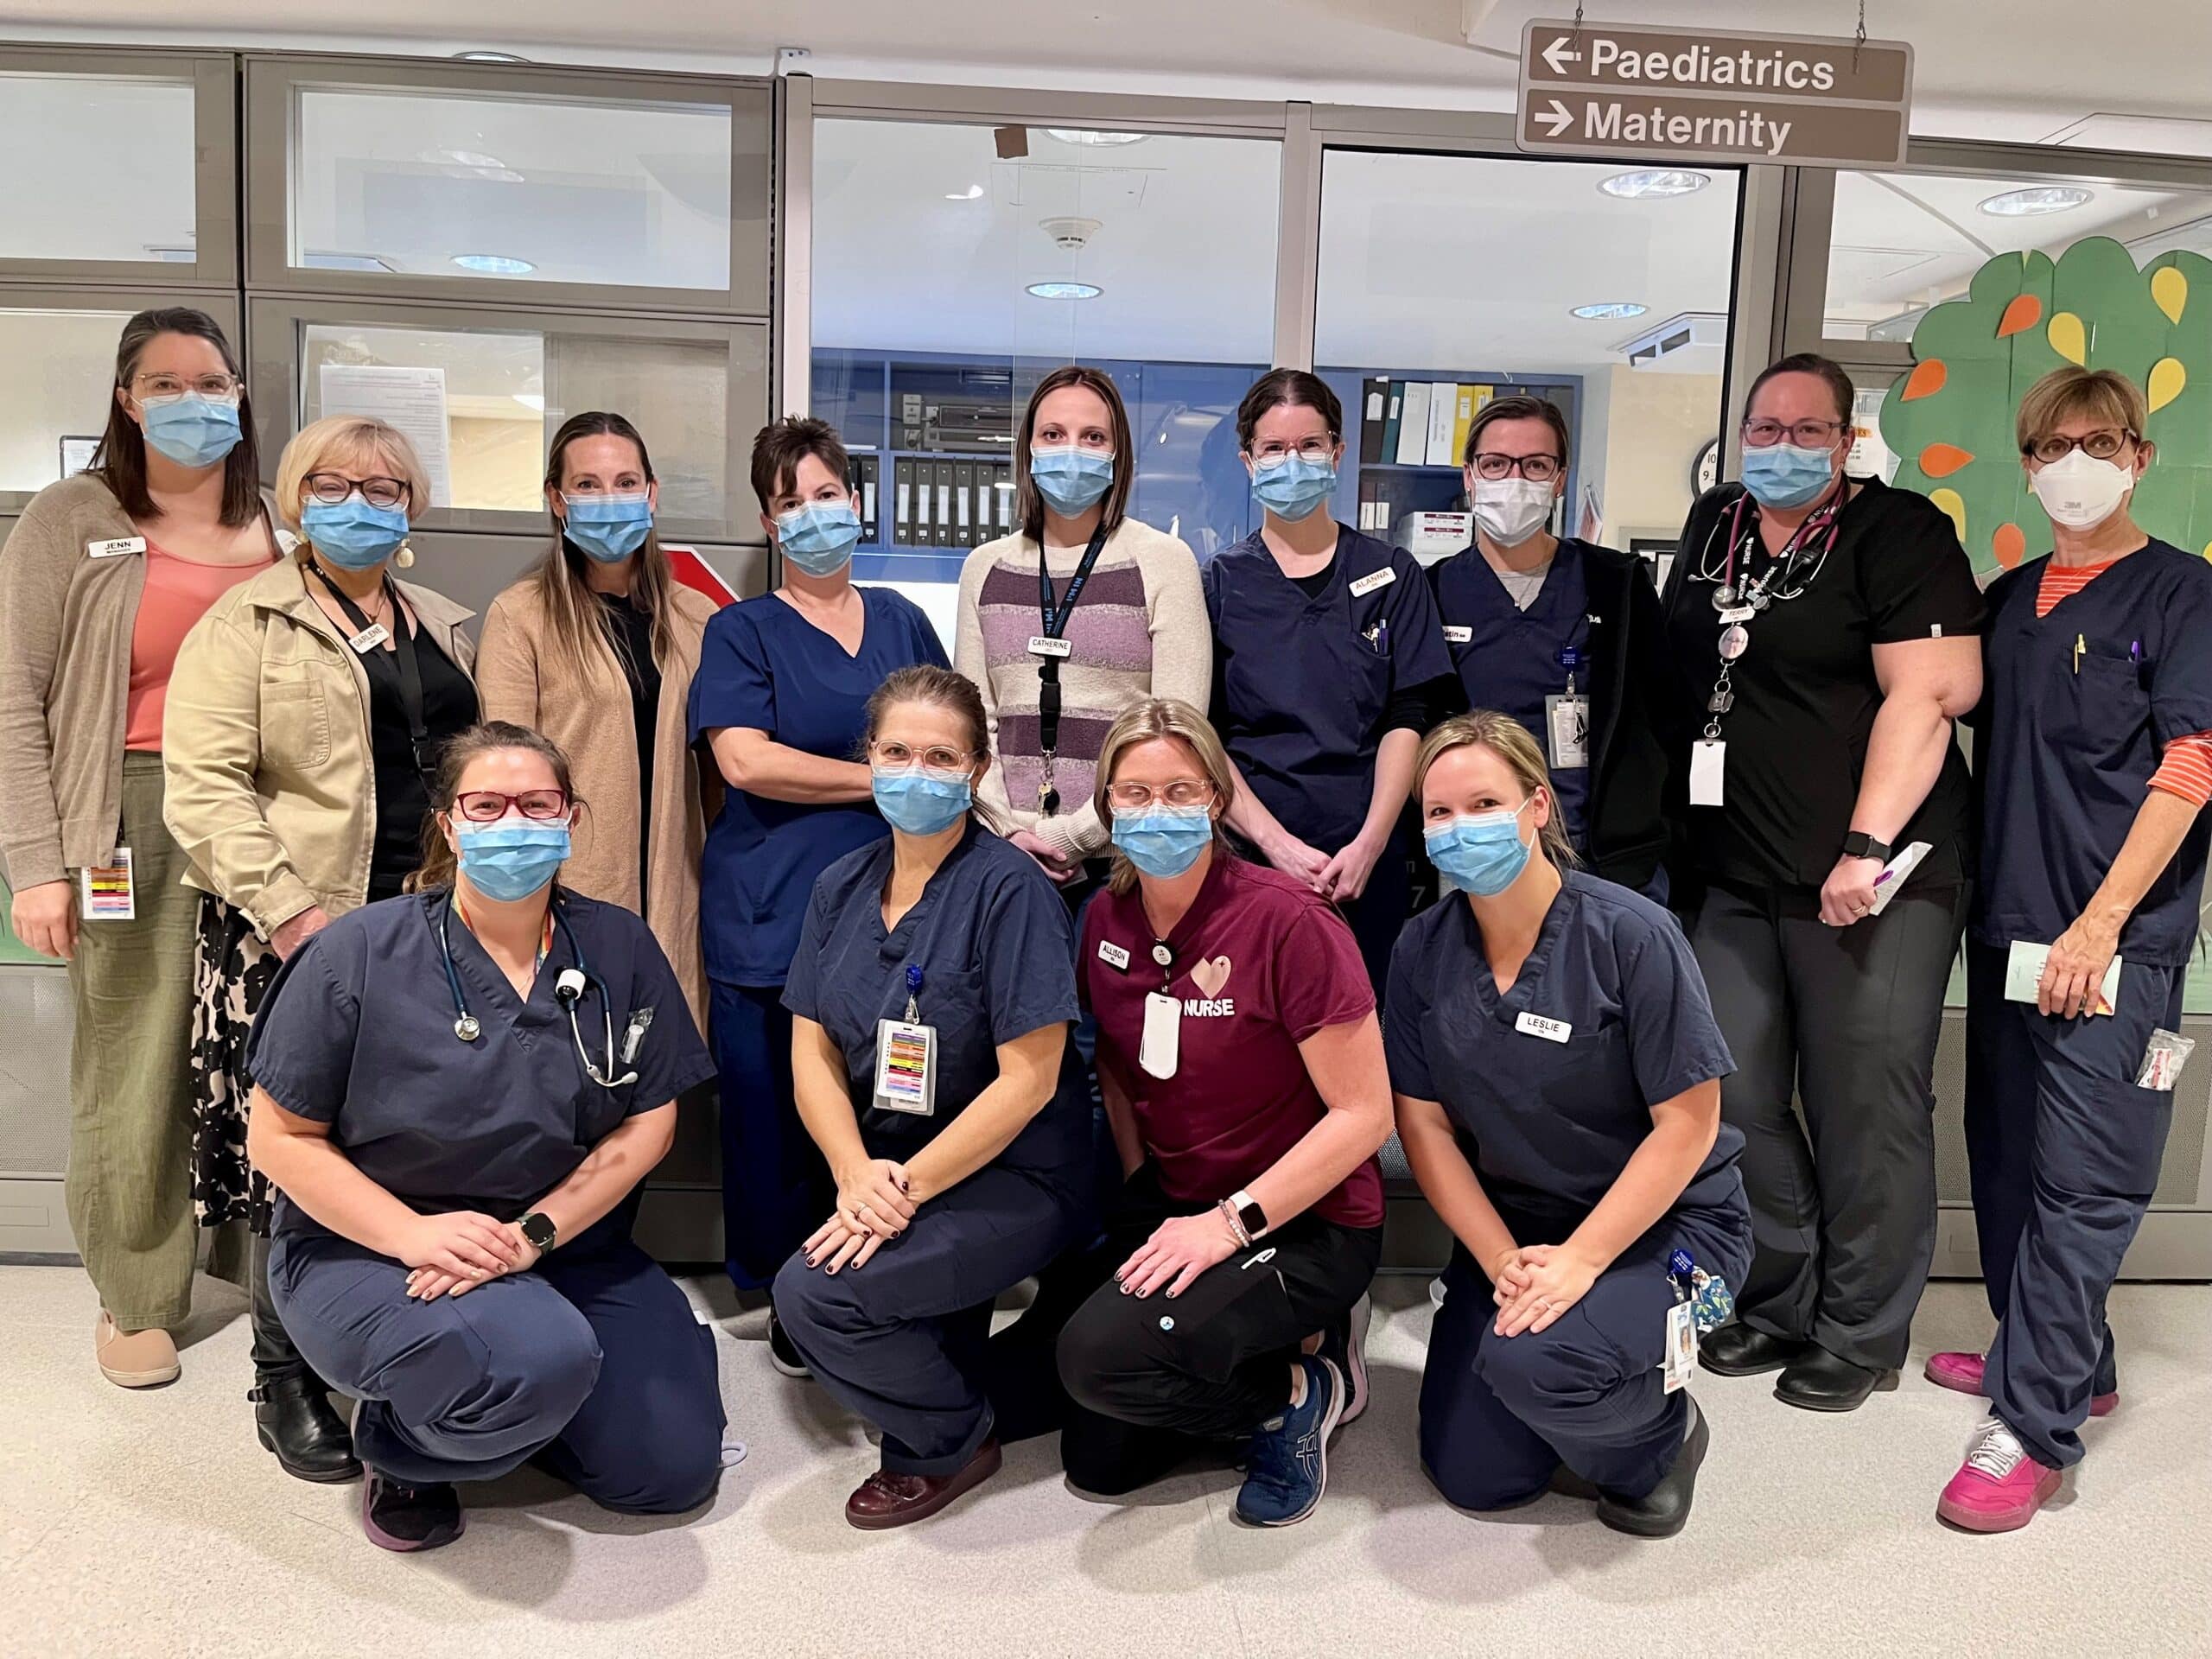 A group of 13 health care professionals wearing medical masks gathered together.